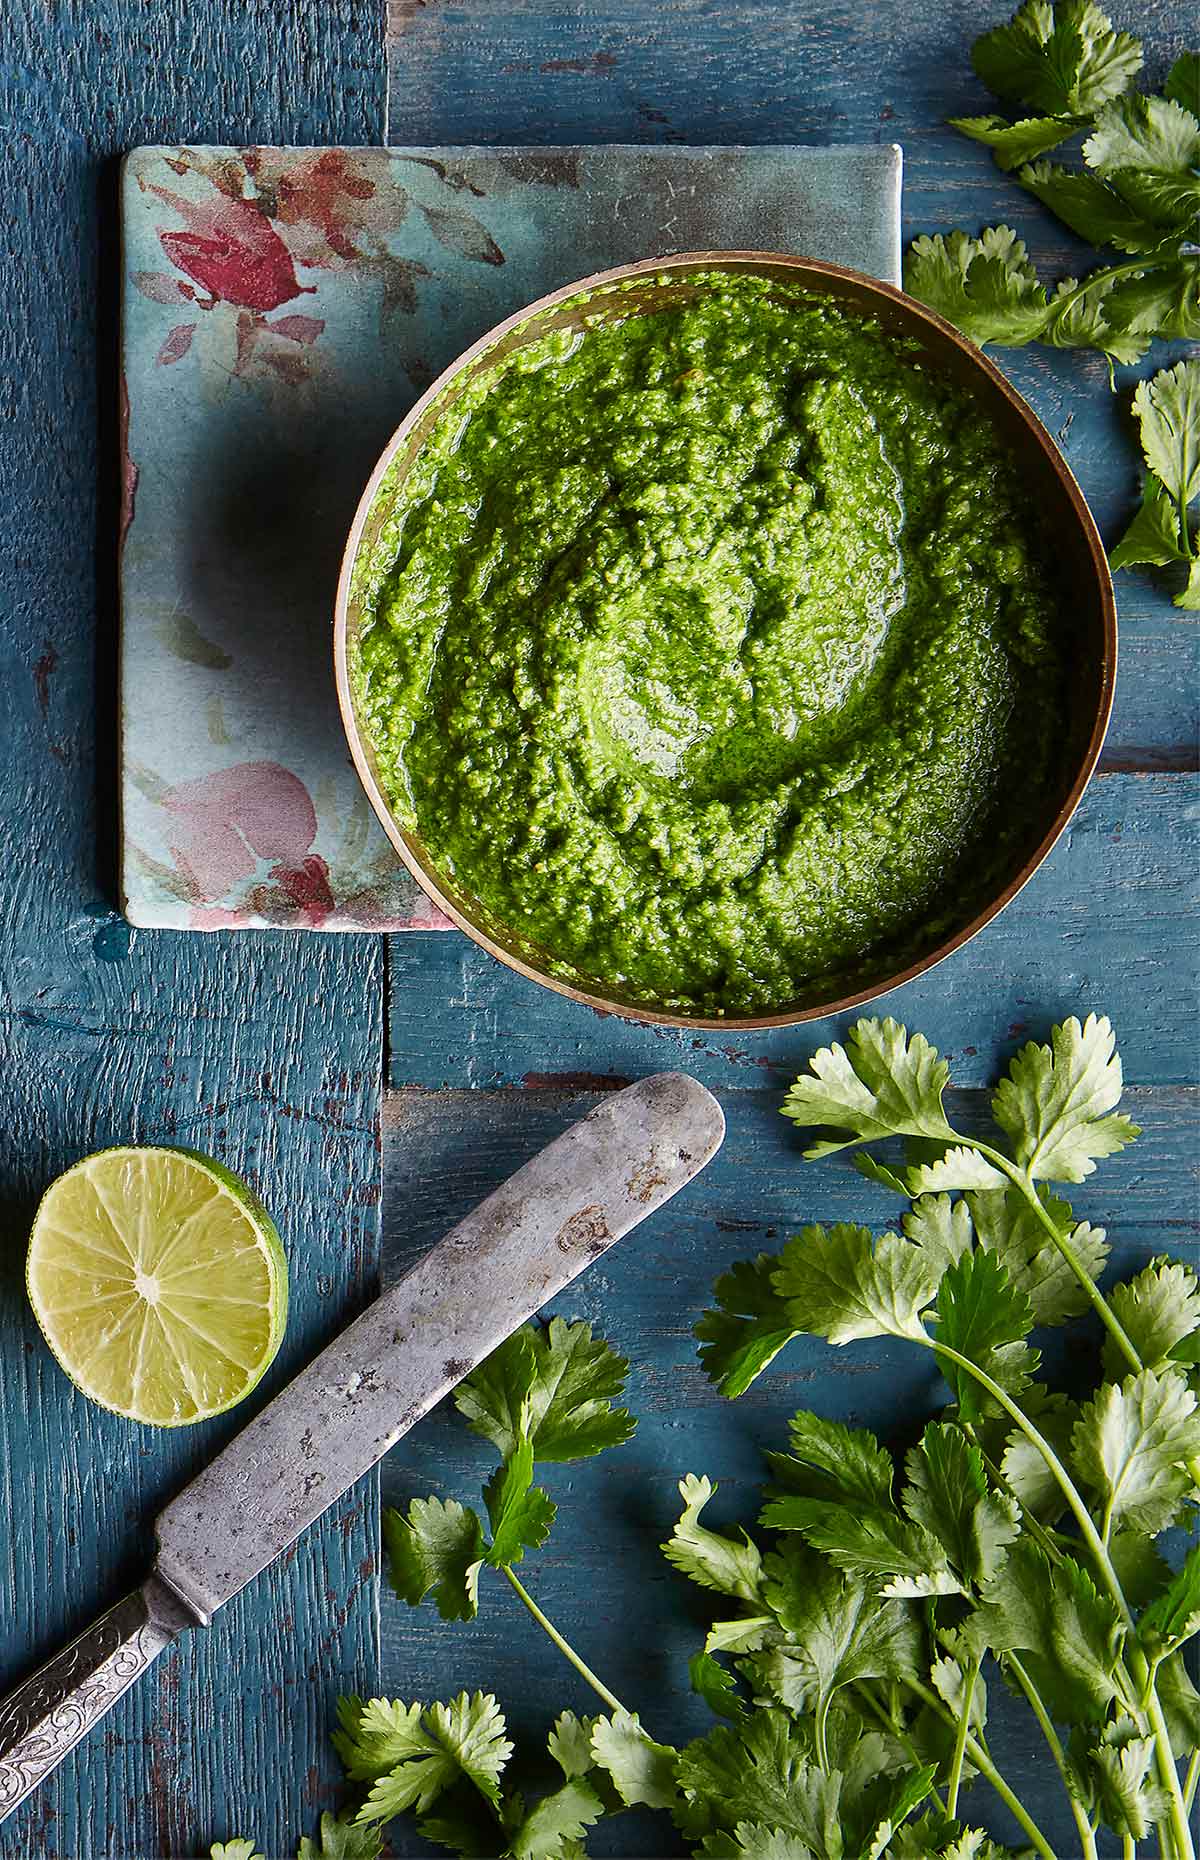 A bowl of bright green cilantro chutney on a blood wooden table with a flower napkin, cilantro leaves, half a lime, and a knife.